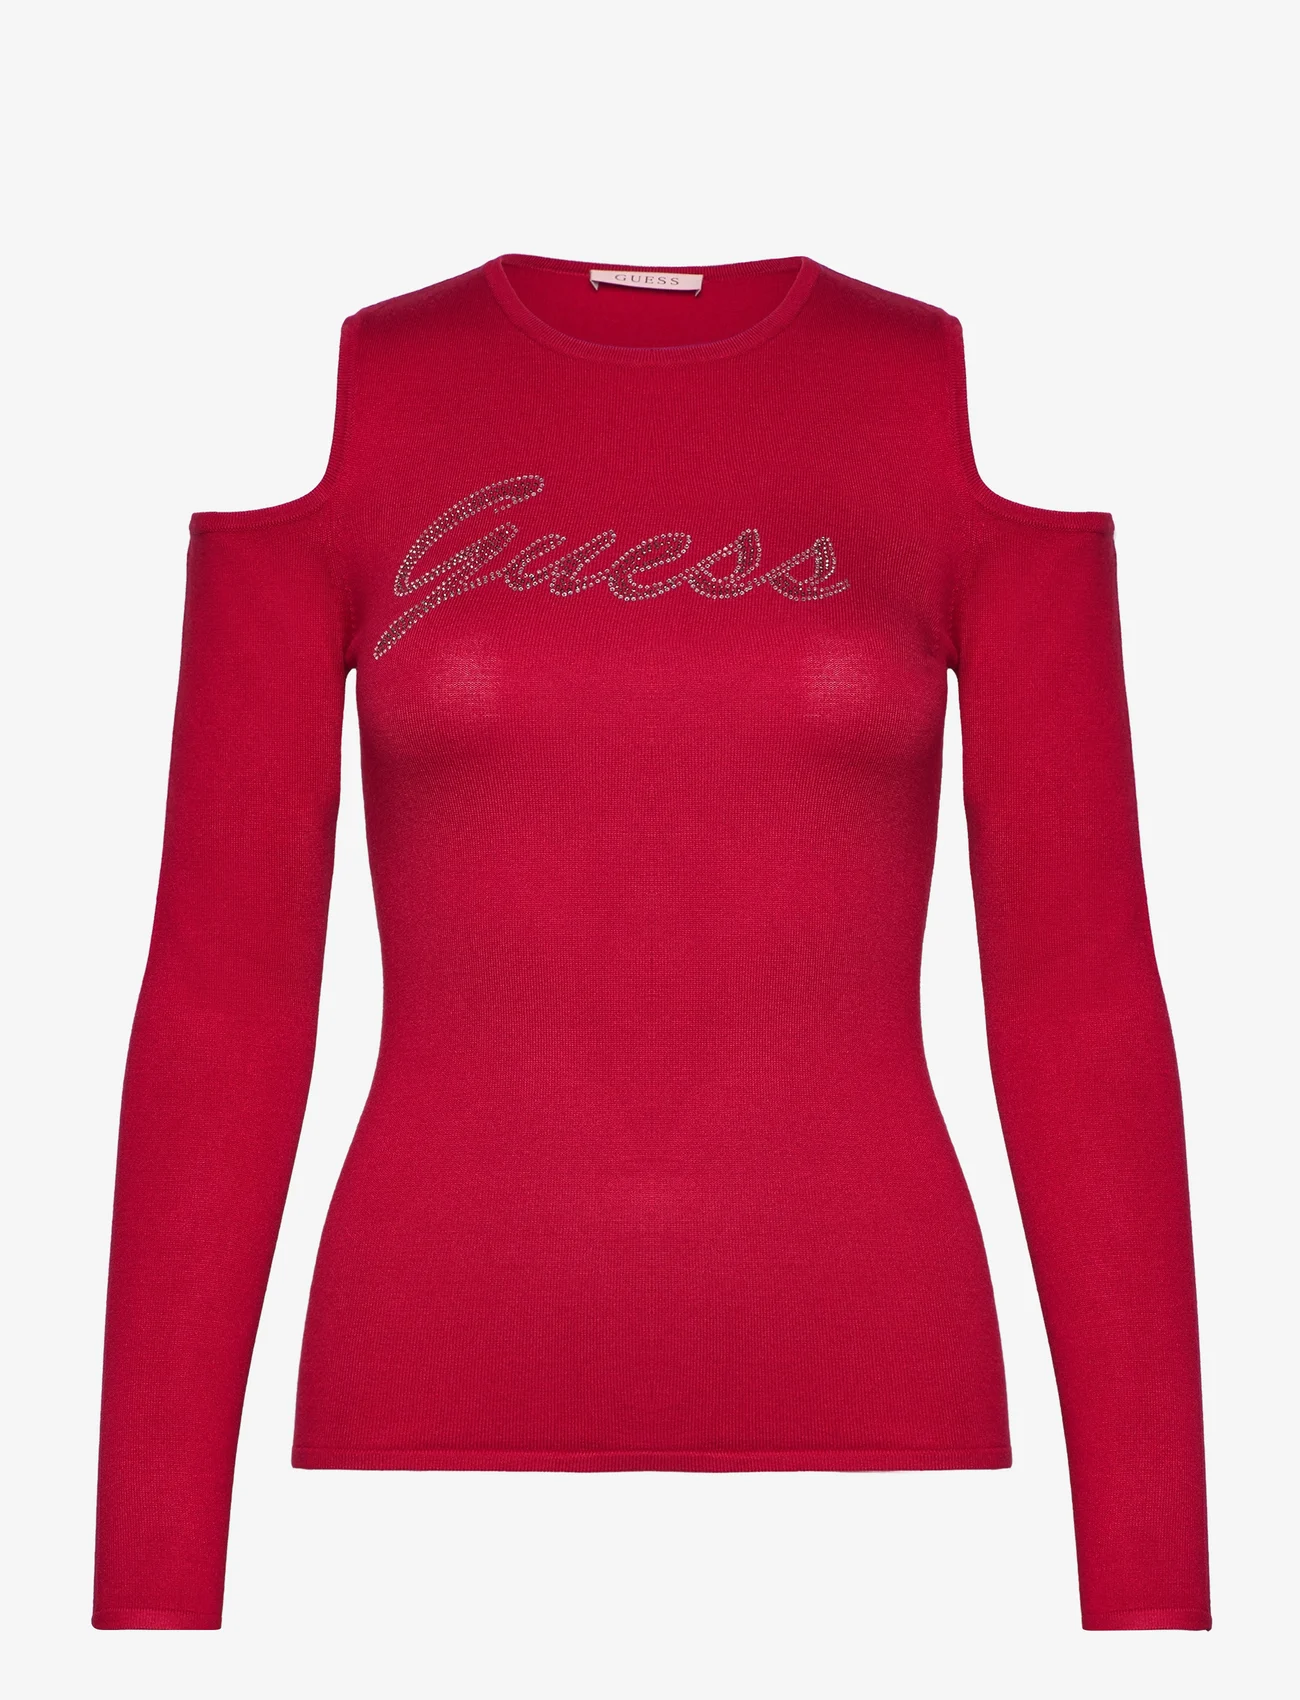 GUESS Jeans - LS COLD SHLDR GUESS LOGO SWTR - long-sleeved tops - chili red - 0